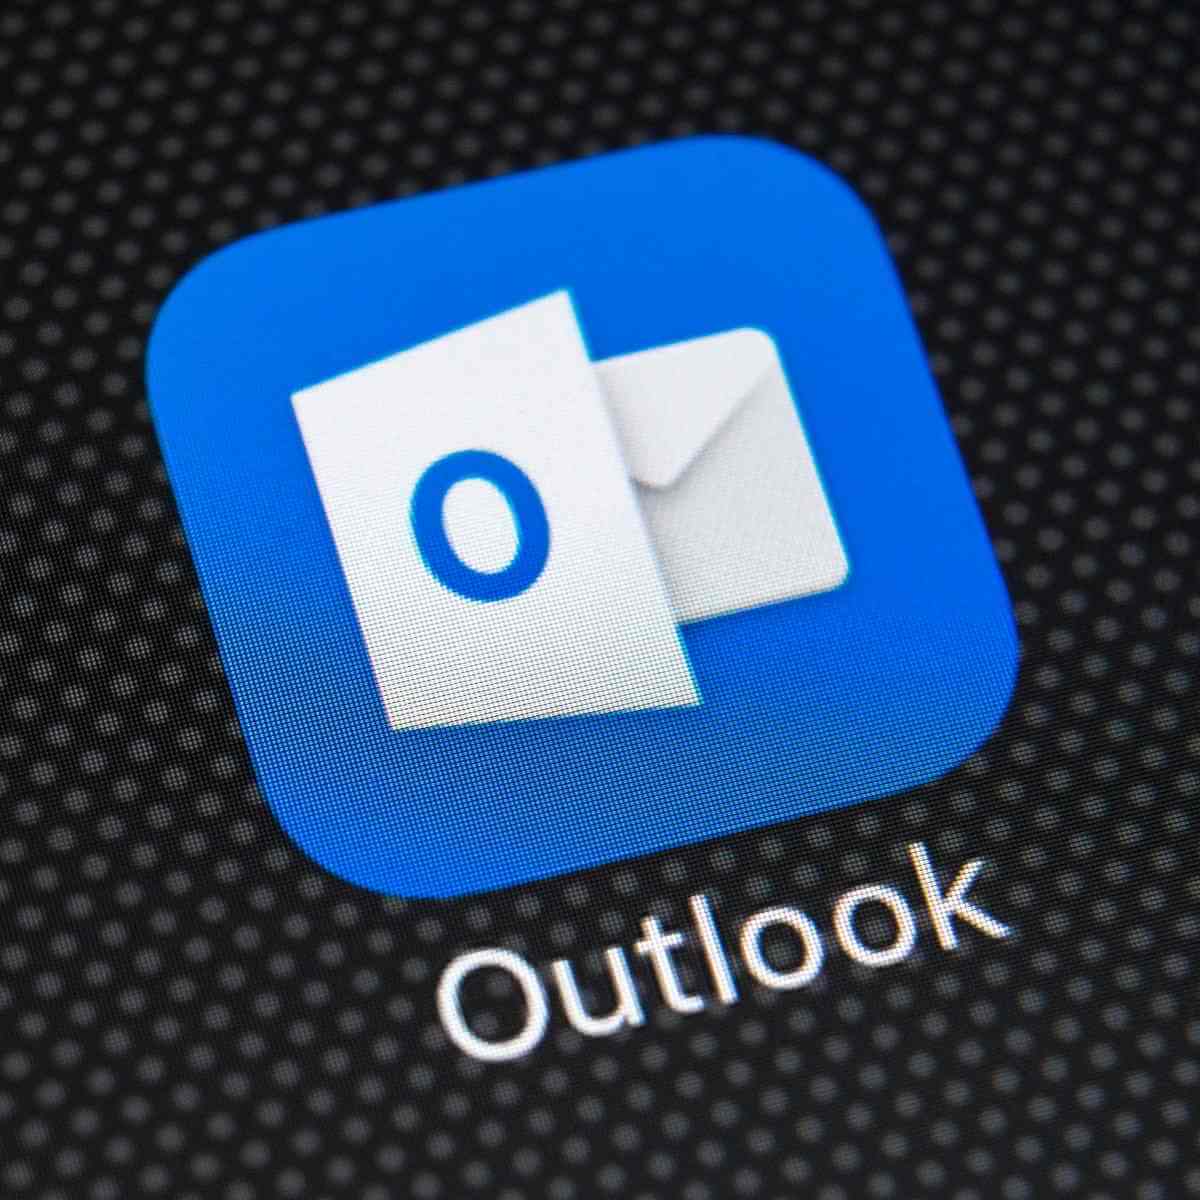 Outlook's password box disappears